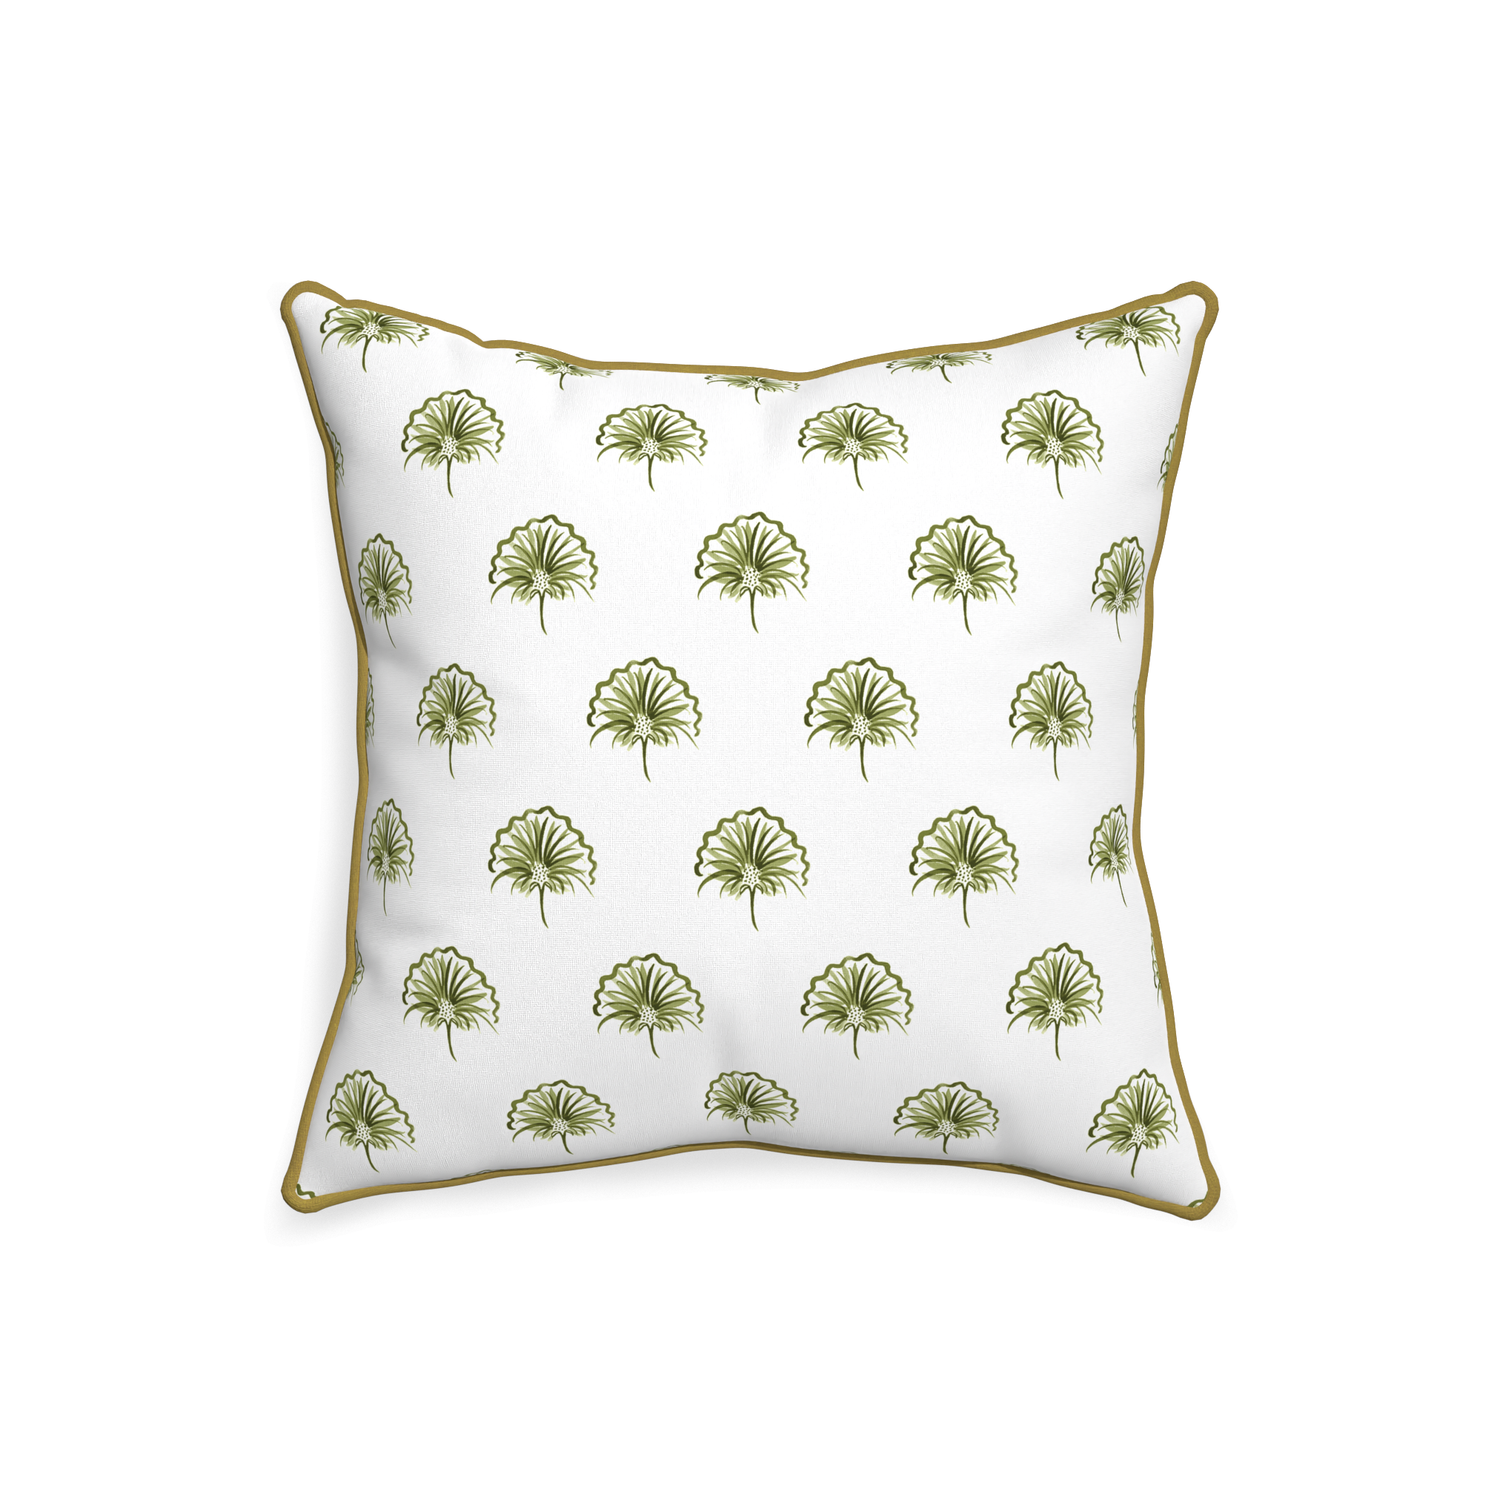 20-square penelope moss custom green floralpillow with c piping on white background